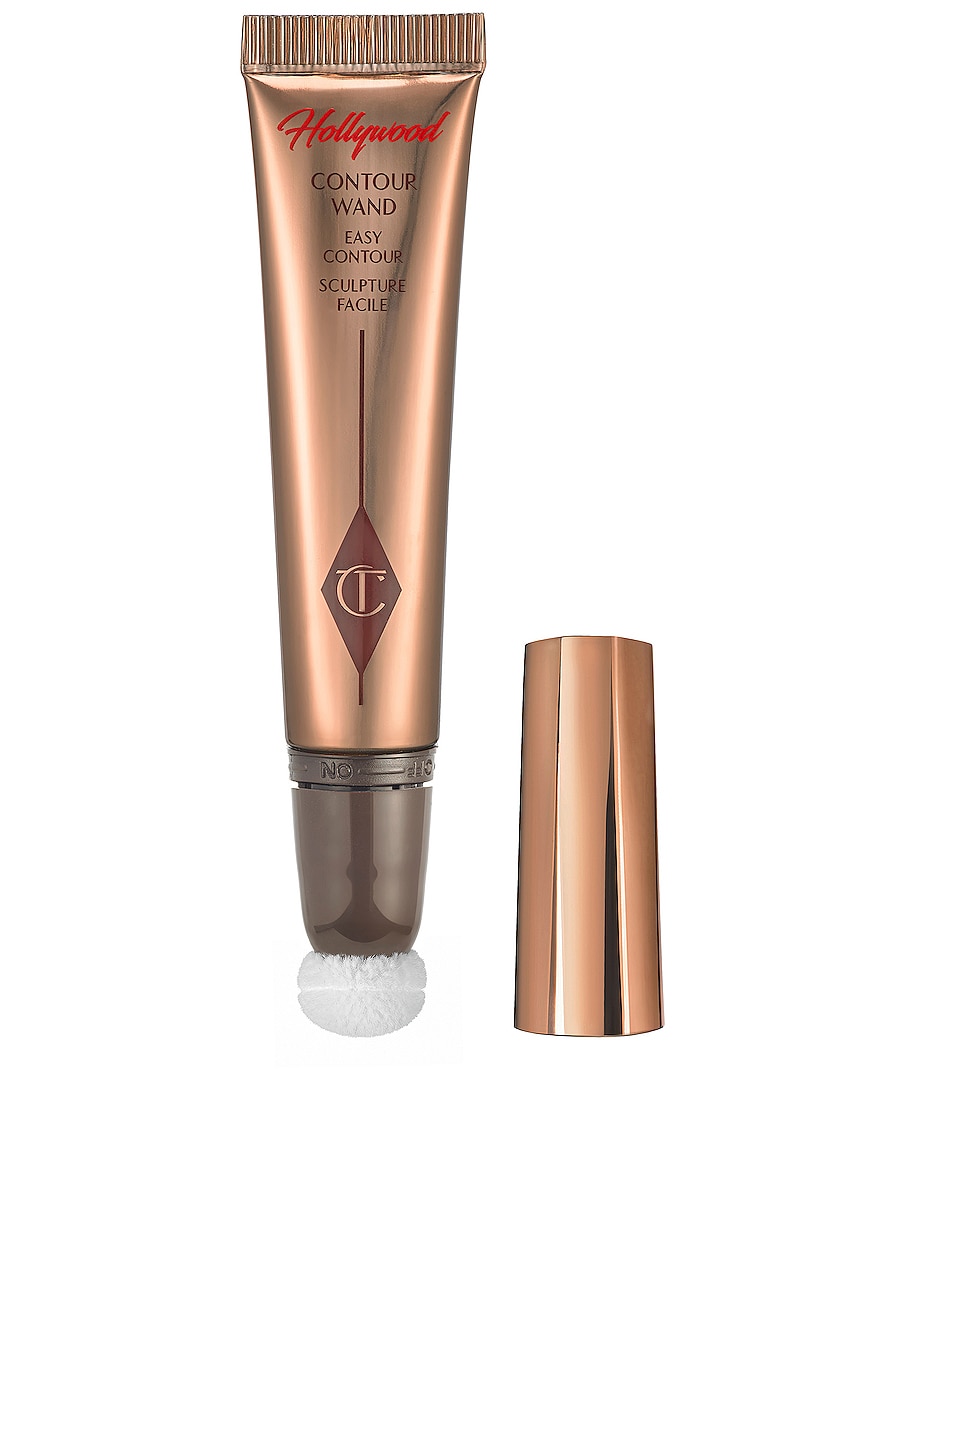 Hollywood Contour Wand in Beauty: NA